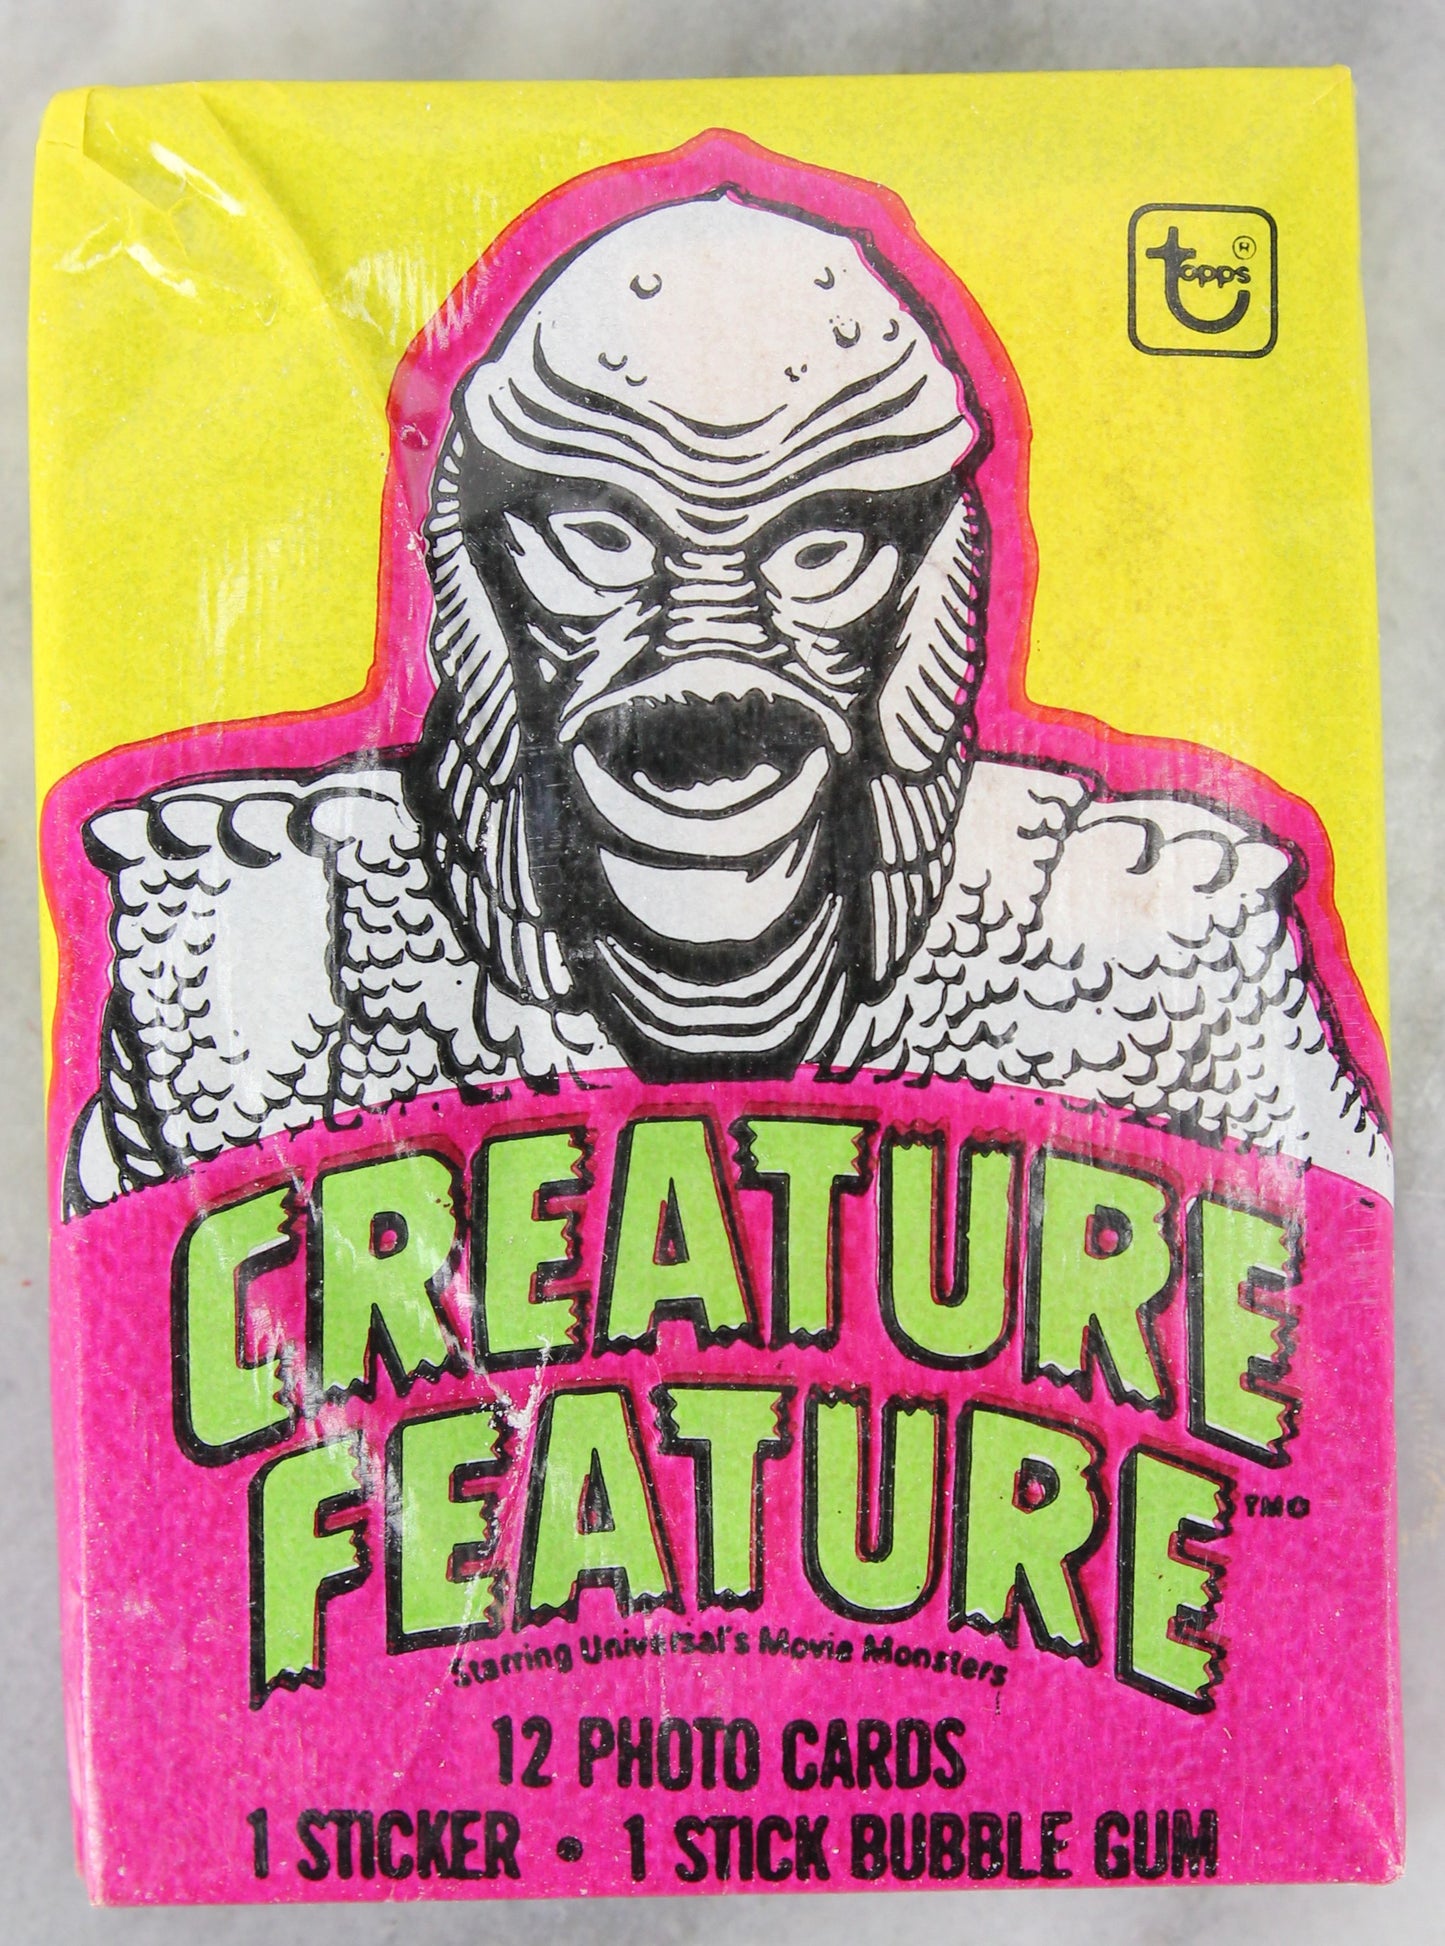 Topps Creature Feature Collectible Trading Cards, One Wax Pack, Black Lagoon, 1980